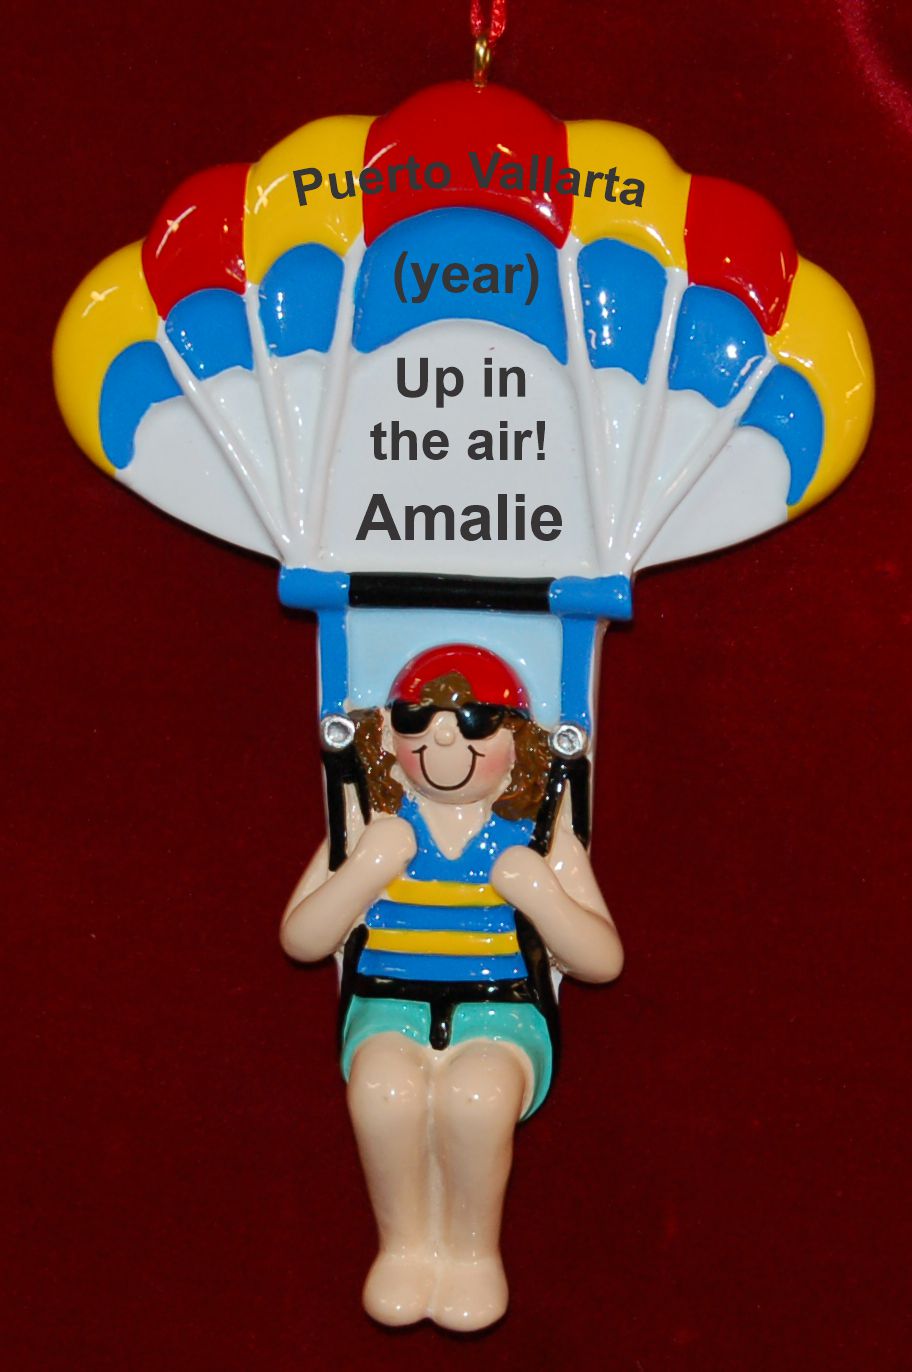 Parasailing Christmas Ornament Female Personalized by RussellRhodes.com